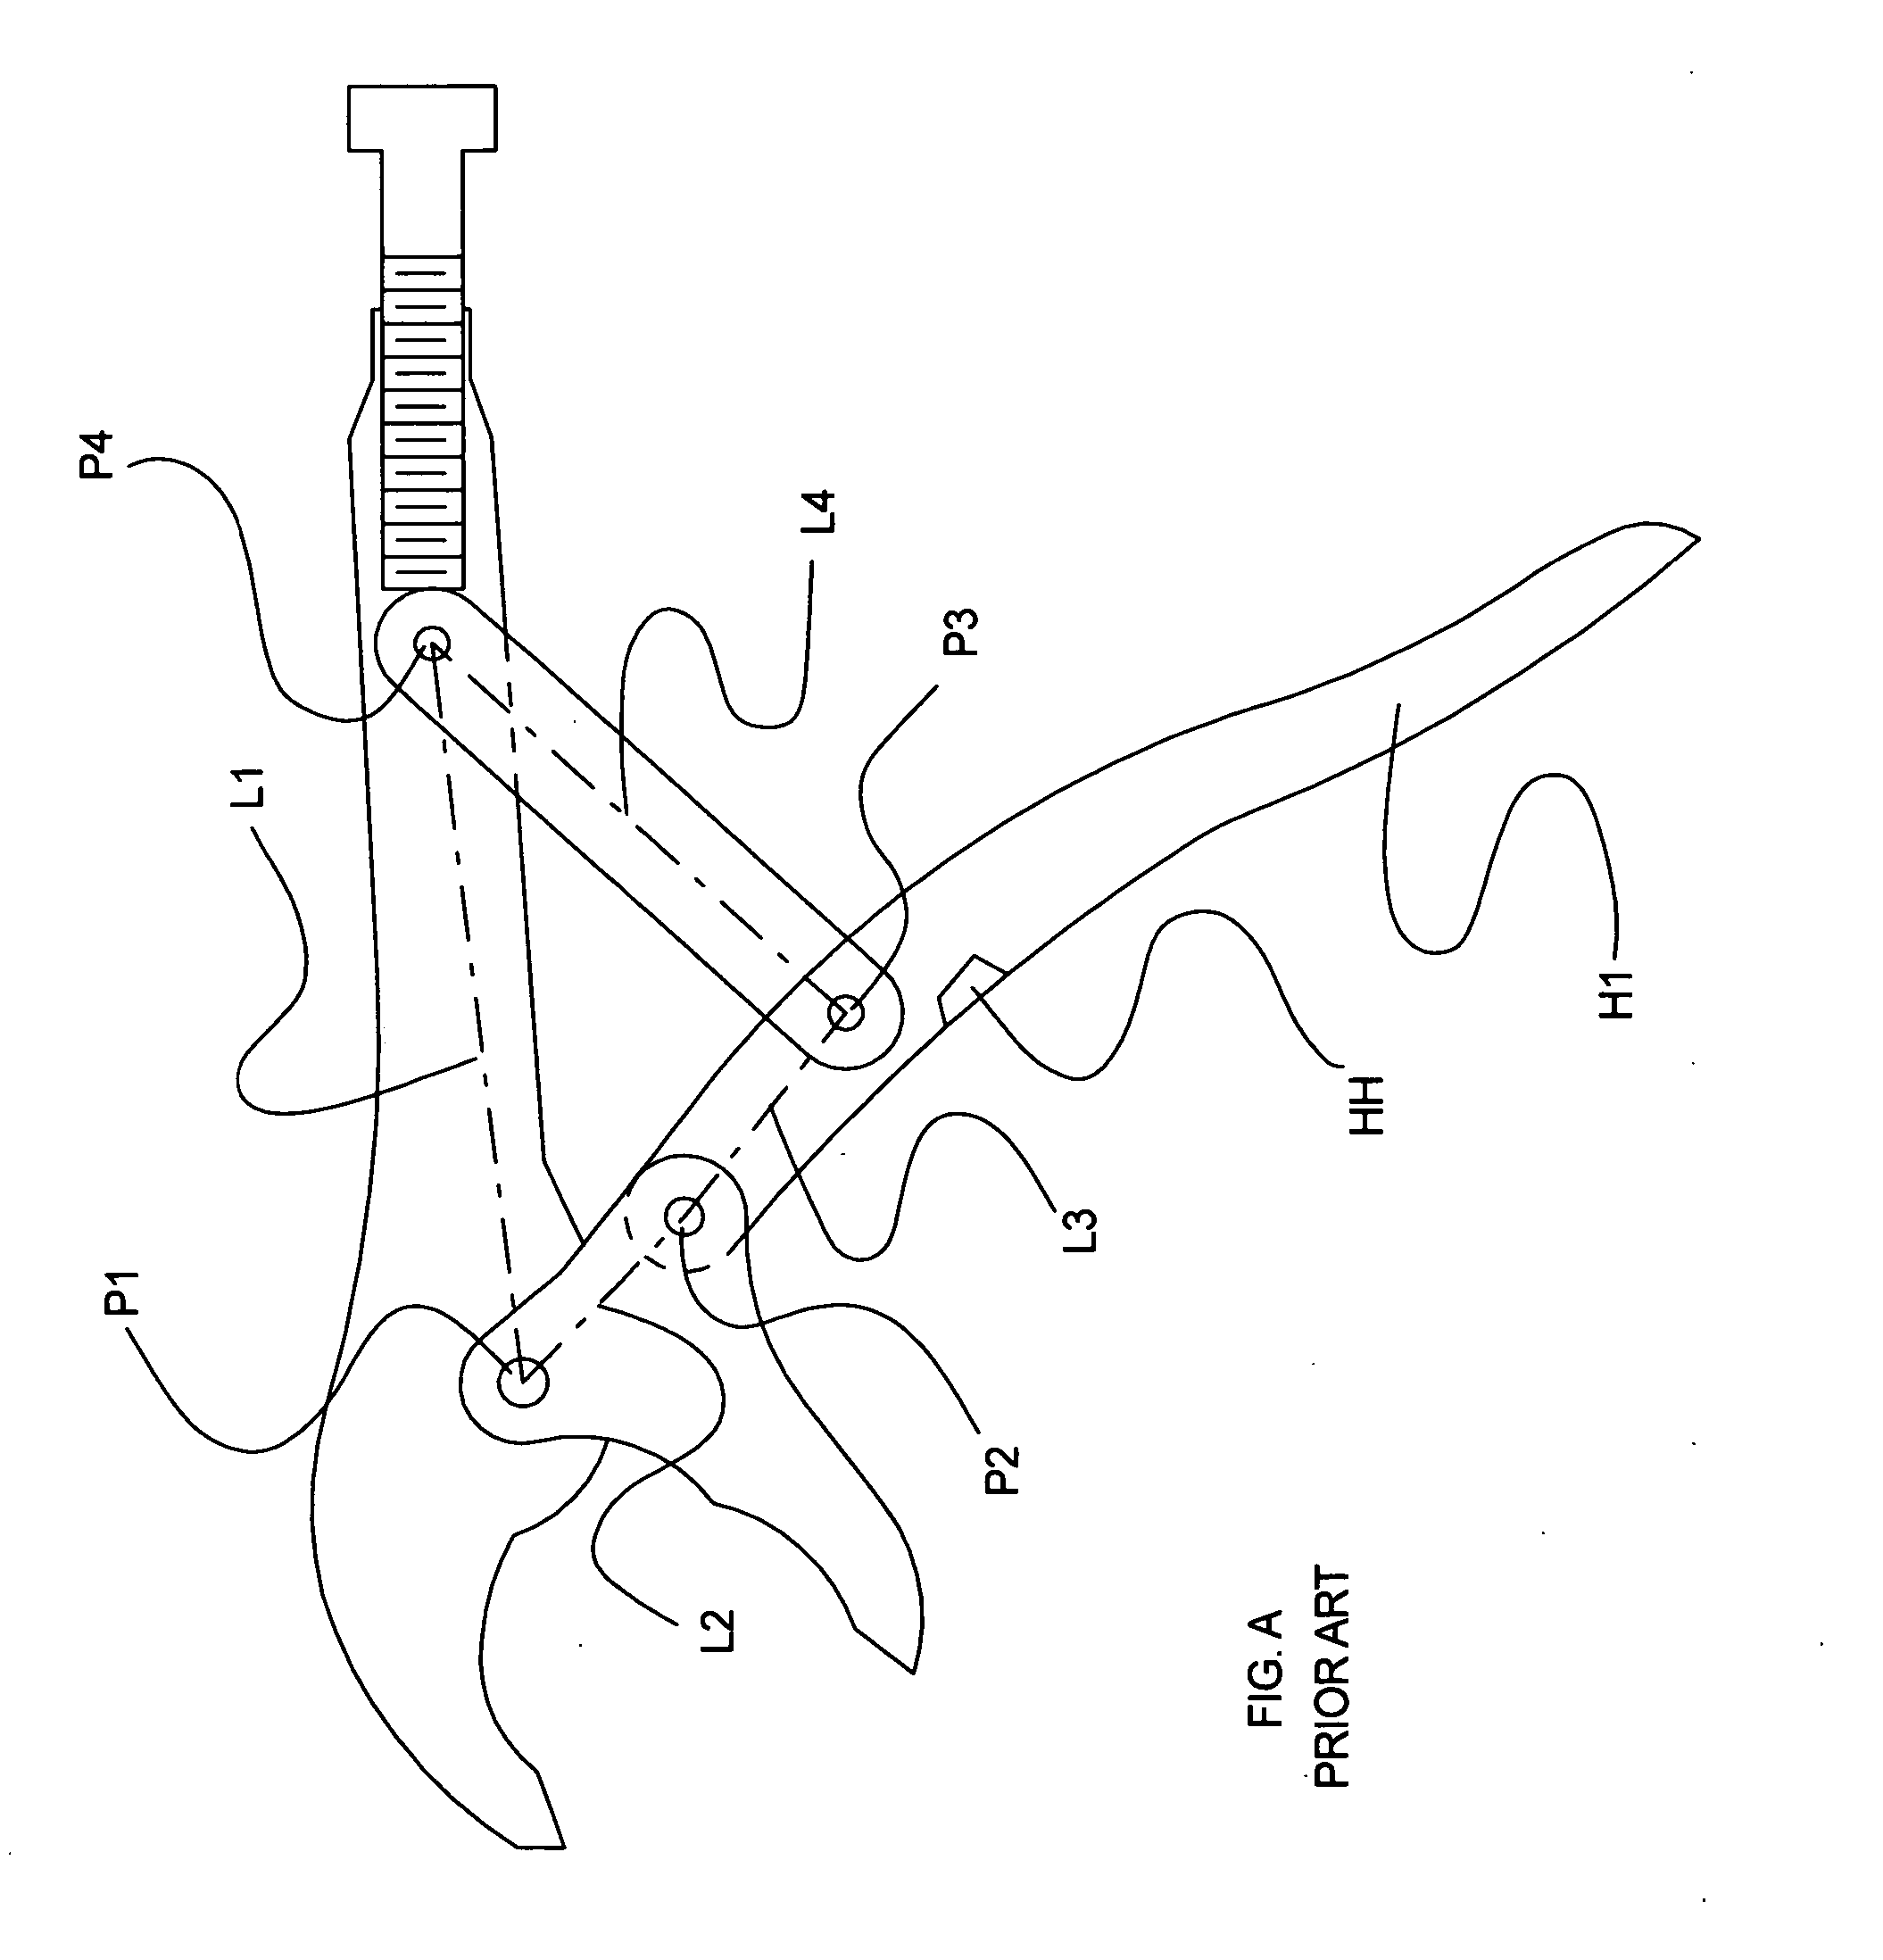 Locking pliers tool with automatic jaw gap adjustment and user-controlled clamping force magnitude